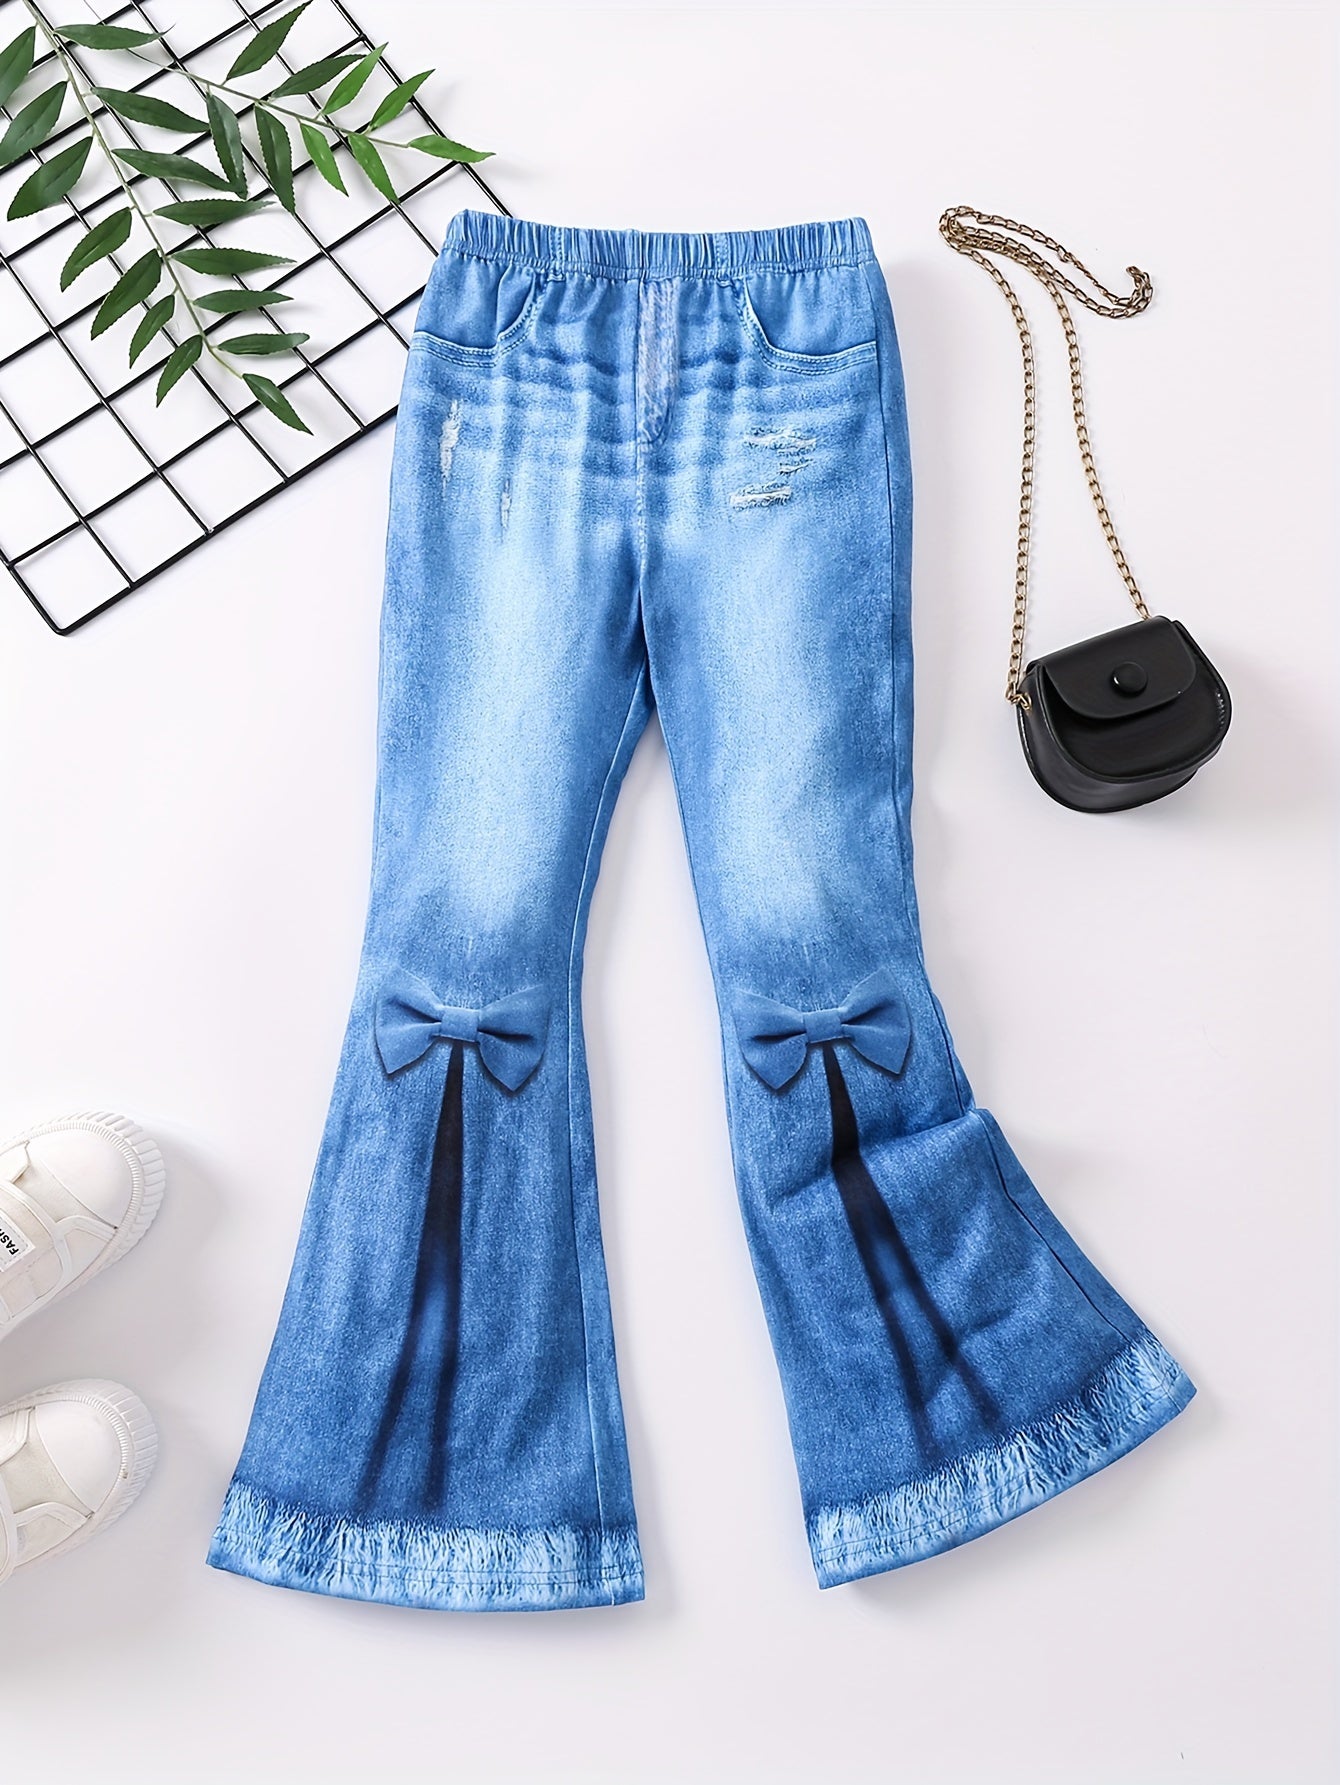 Faux Denim print Flare Pants Girls Comfy & Trendy Leggings Kids Clothes Party Gift Christmas